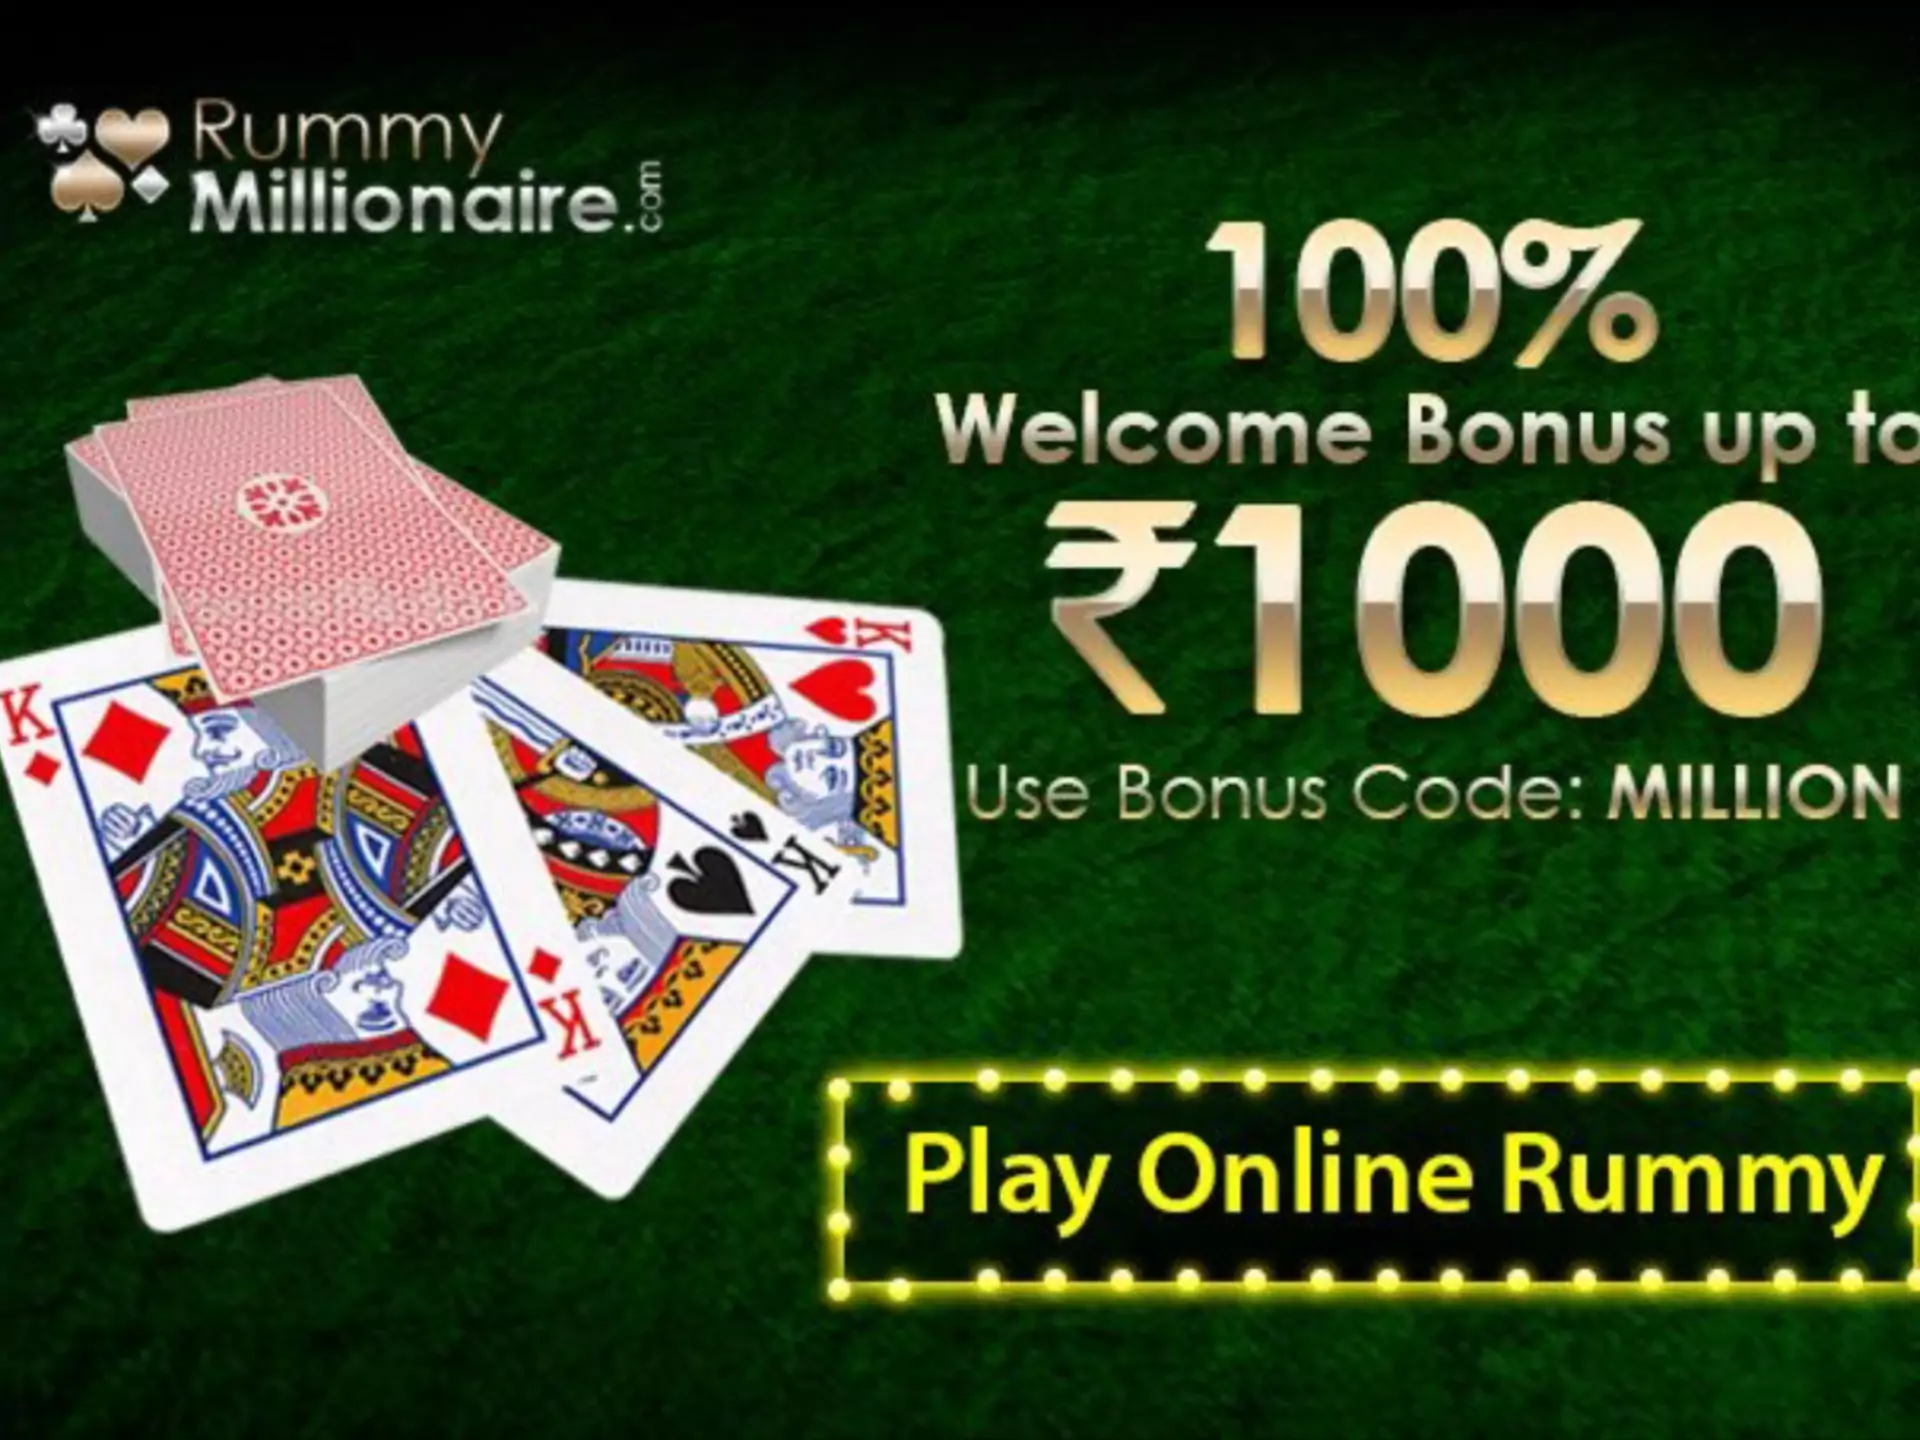 Sign up for an online casino and get bonuses on playing rummy.